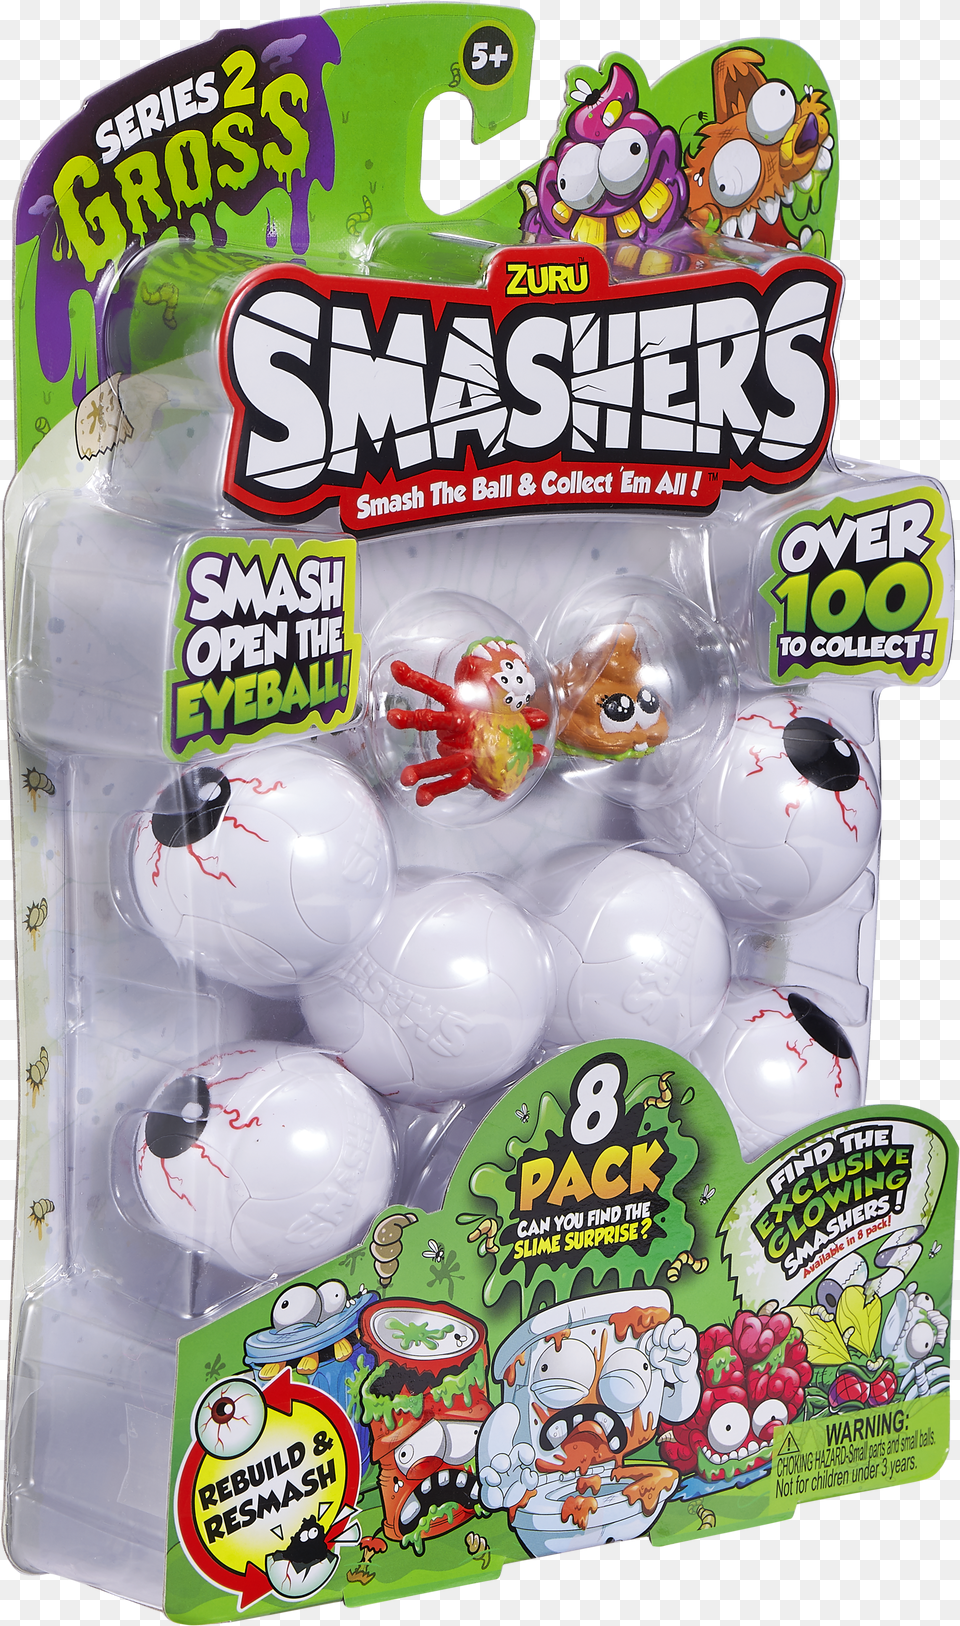 Series Smashers 2 Eight Pack Toys Png